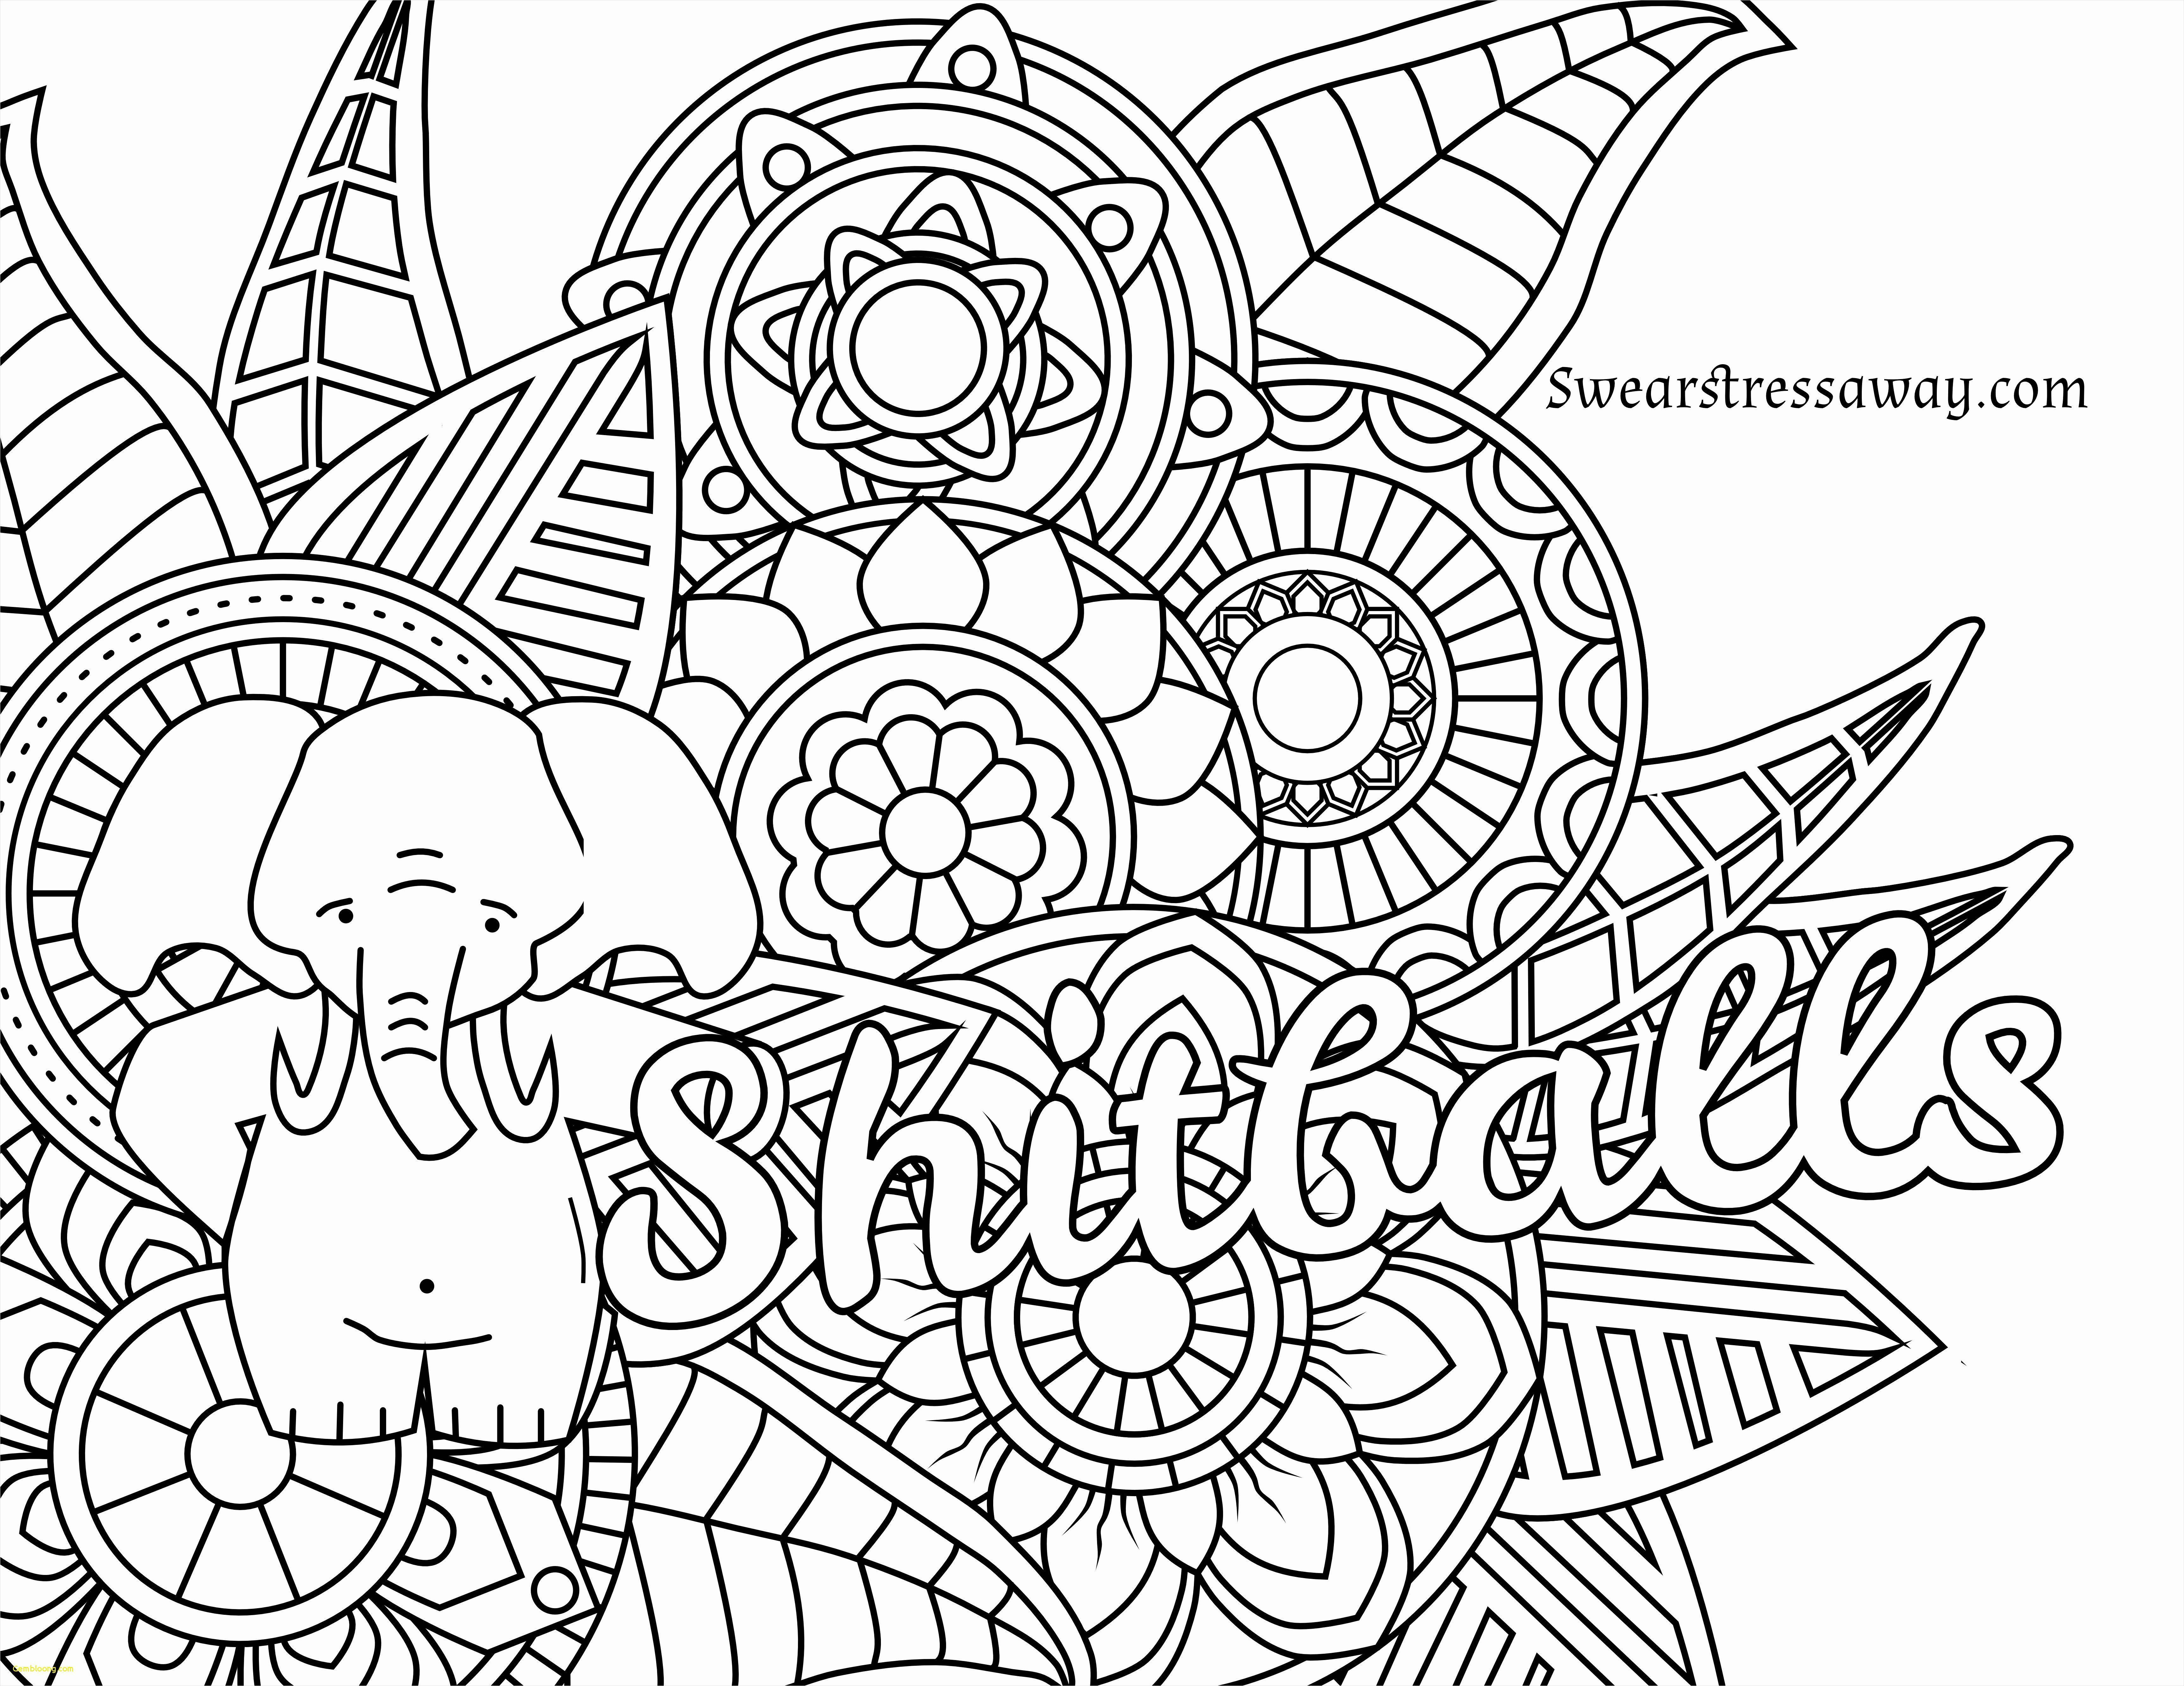 New Adult Coloring Pages Swear Words | Jvzooreview - Free Printable Swear Word Coloring Pages